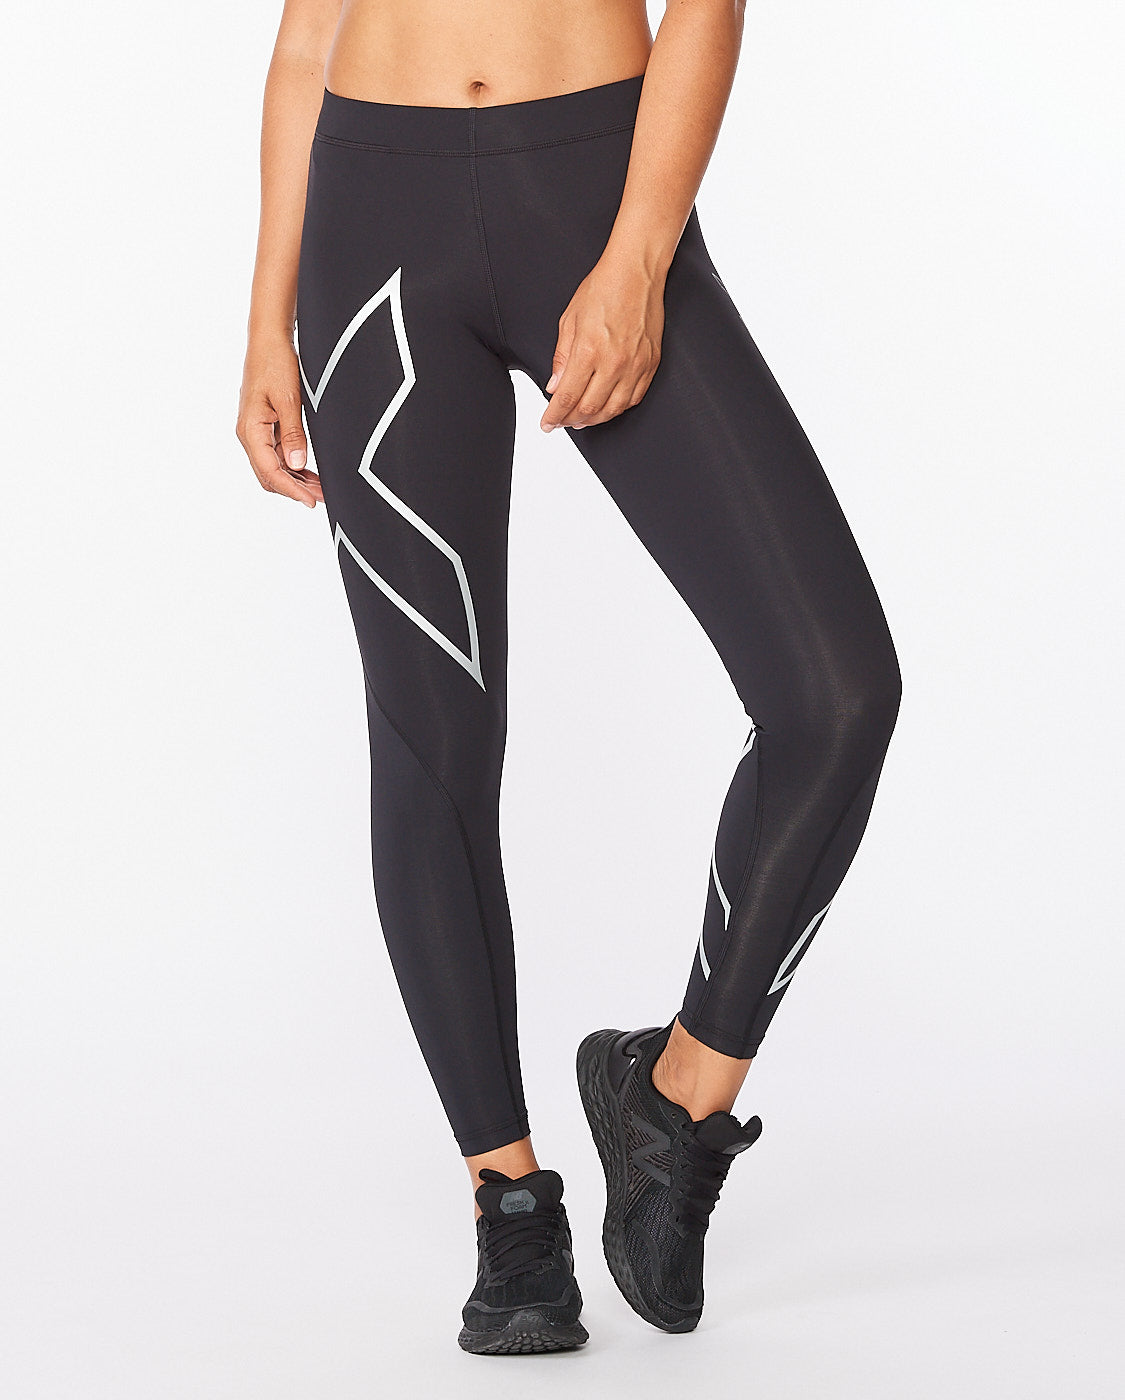 2XU Refresh Recovery Comp woman tights RUNKD online running store